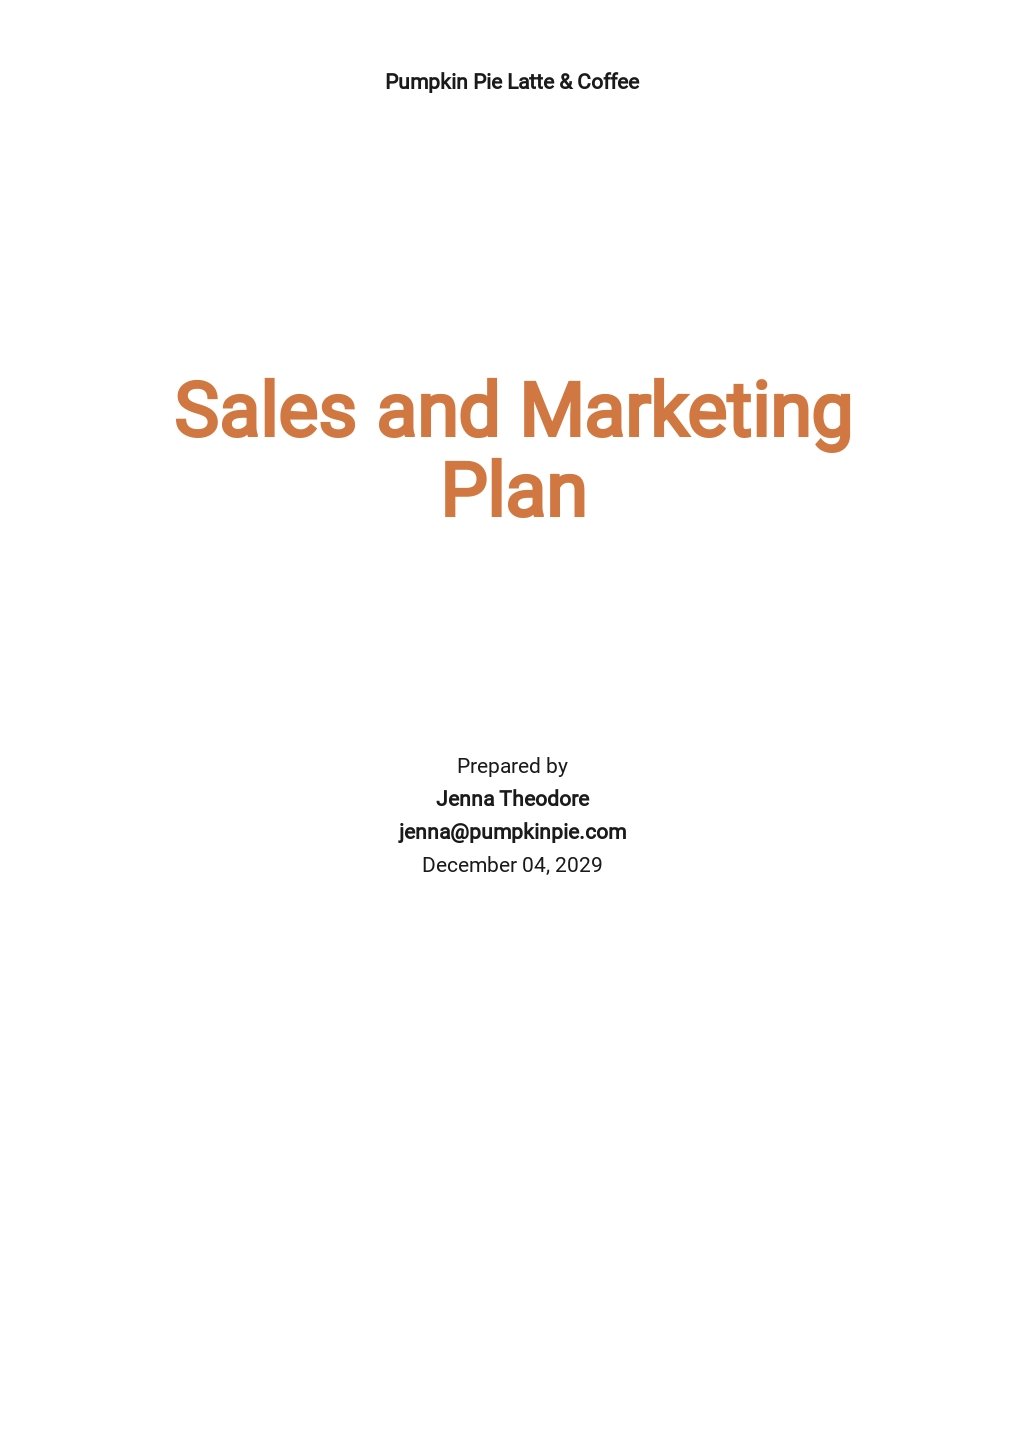 Sales and Marketing Plan Template Google Docs, Word, Apple Pages, PDF